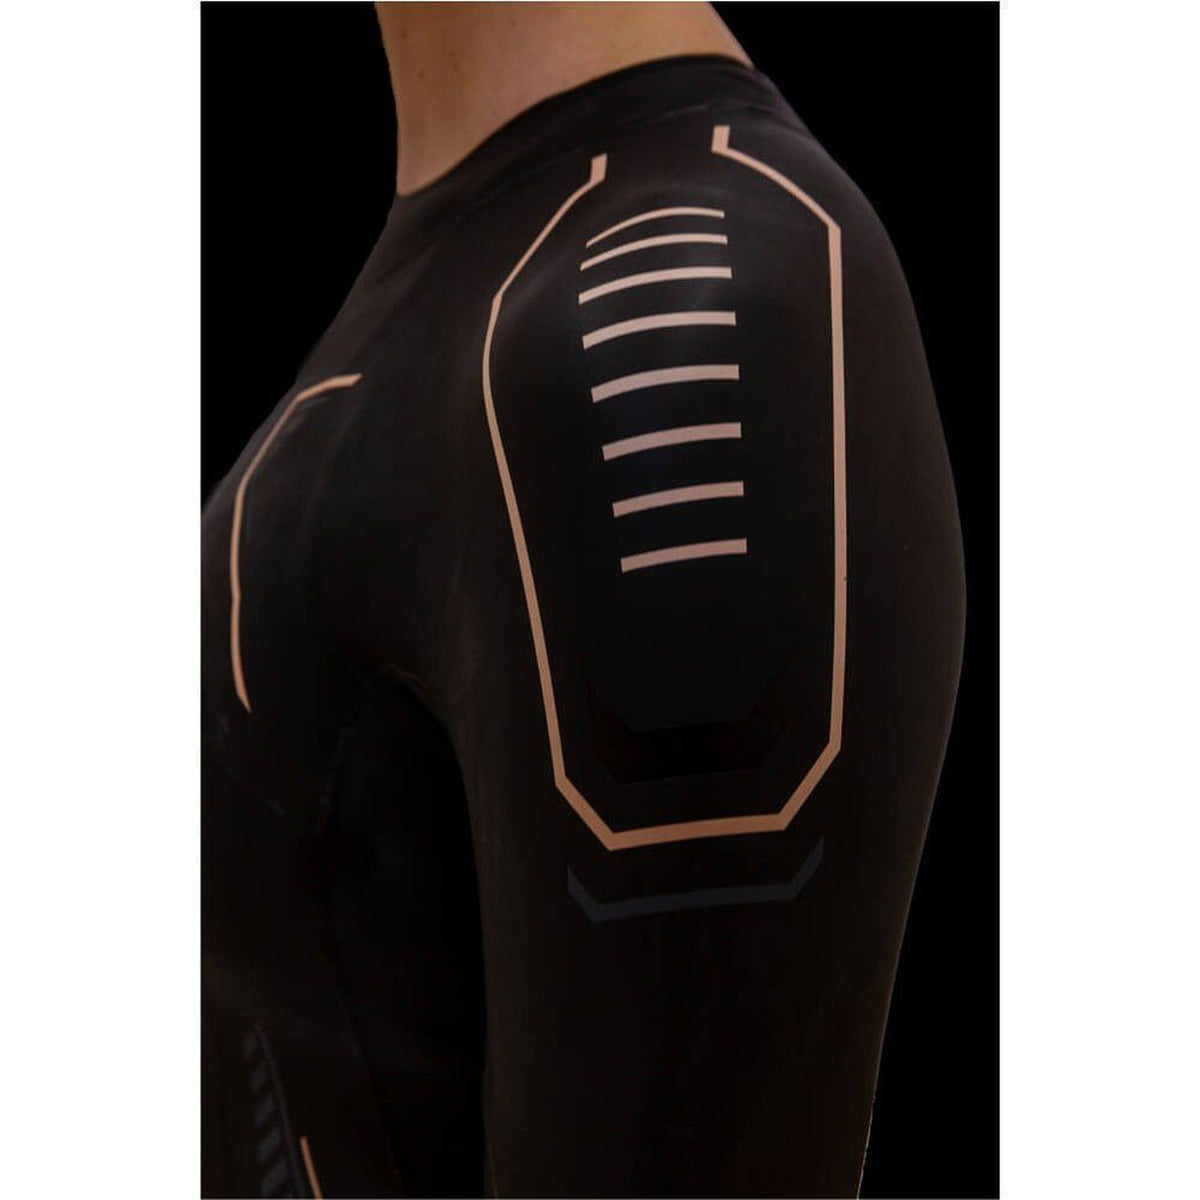 Zone3 Women's Vision Wetsuit 2021